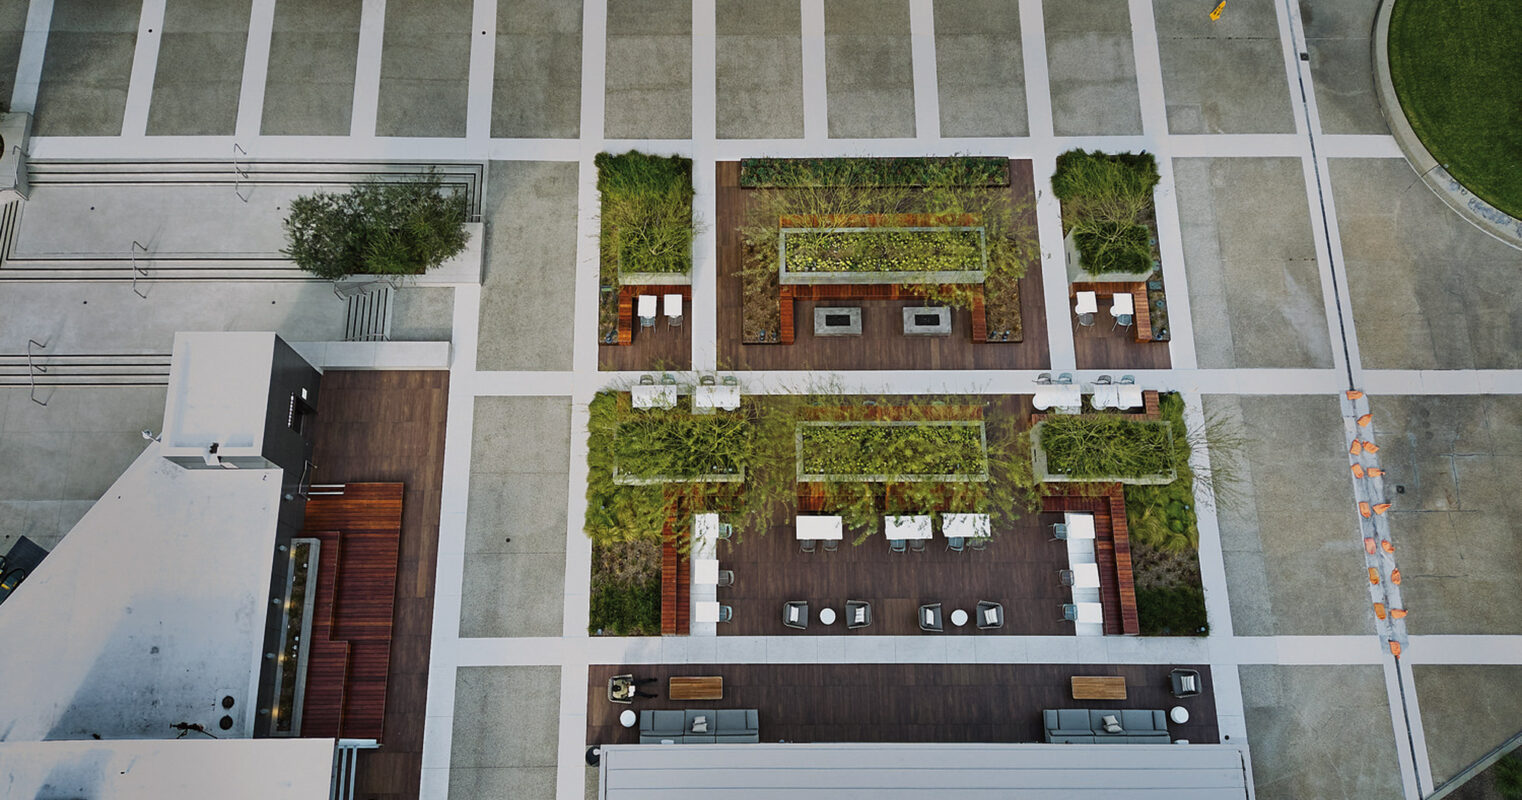 Bird's-eye view of a rooftop garden with arranged green spaces among wooden decking, flanked by contemporary outdoor furniture and surrounded by urban architectural elements. Design seamlessly integrates natural and built environments, providing a relaxing communal space atop a city structure.